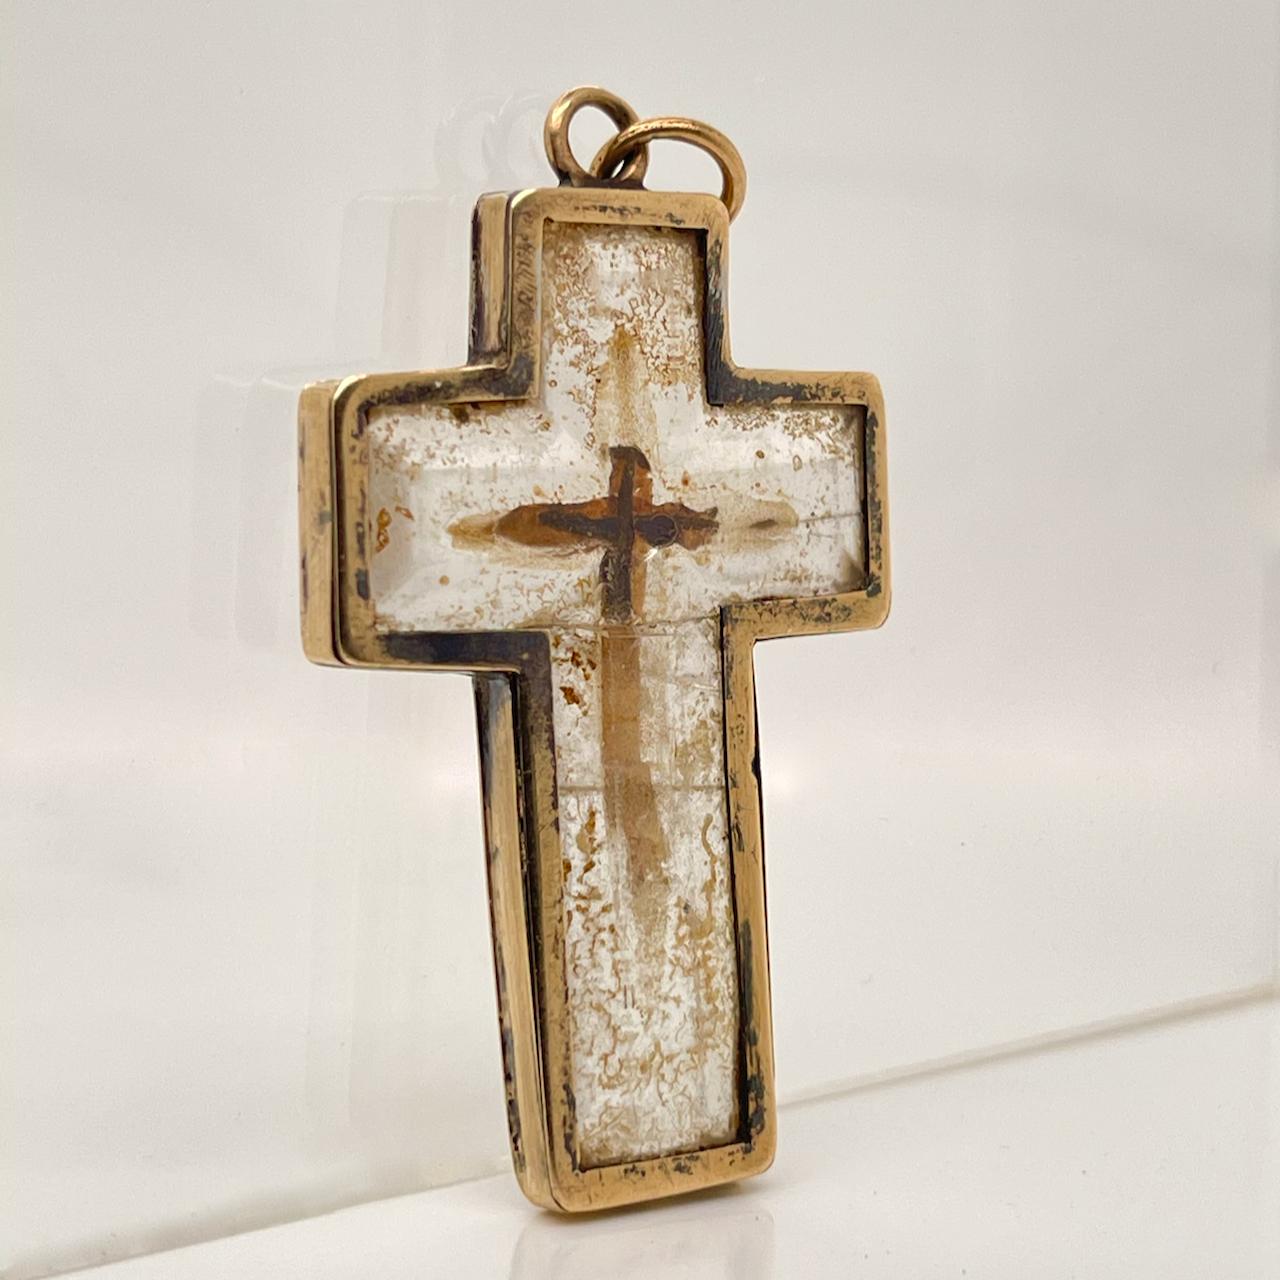 A very fine antique rock crystal & 14k gold cross or crucifix. 

The rock crystal has an interior chamber that appears to be carved out and hold dark splinters. We assume this is a relic.

The rock crystal itself is bezel set in 14 karat gold.  

By